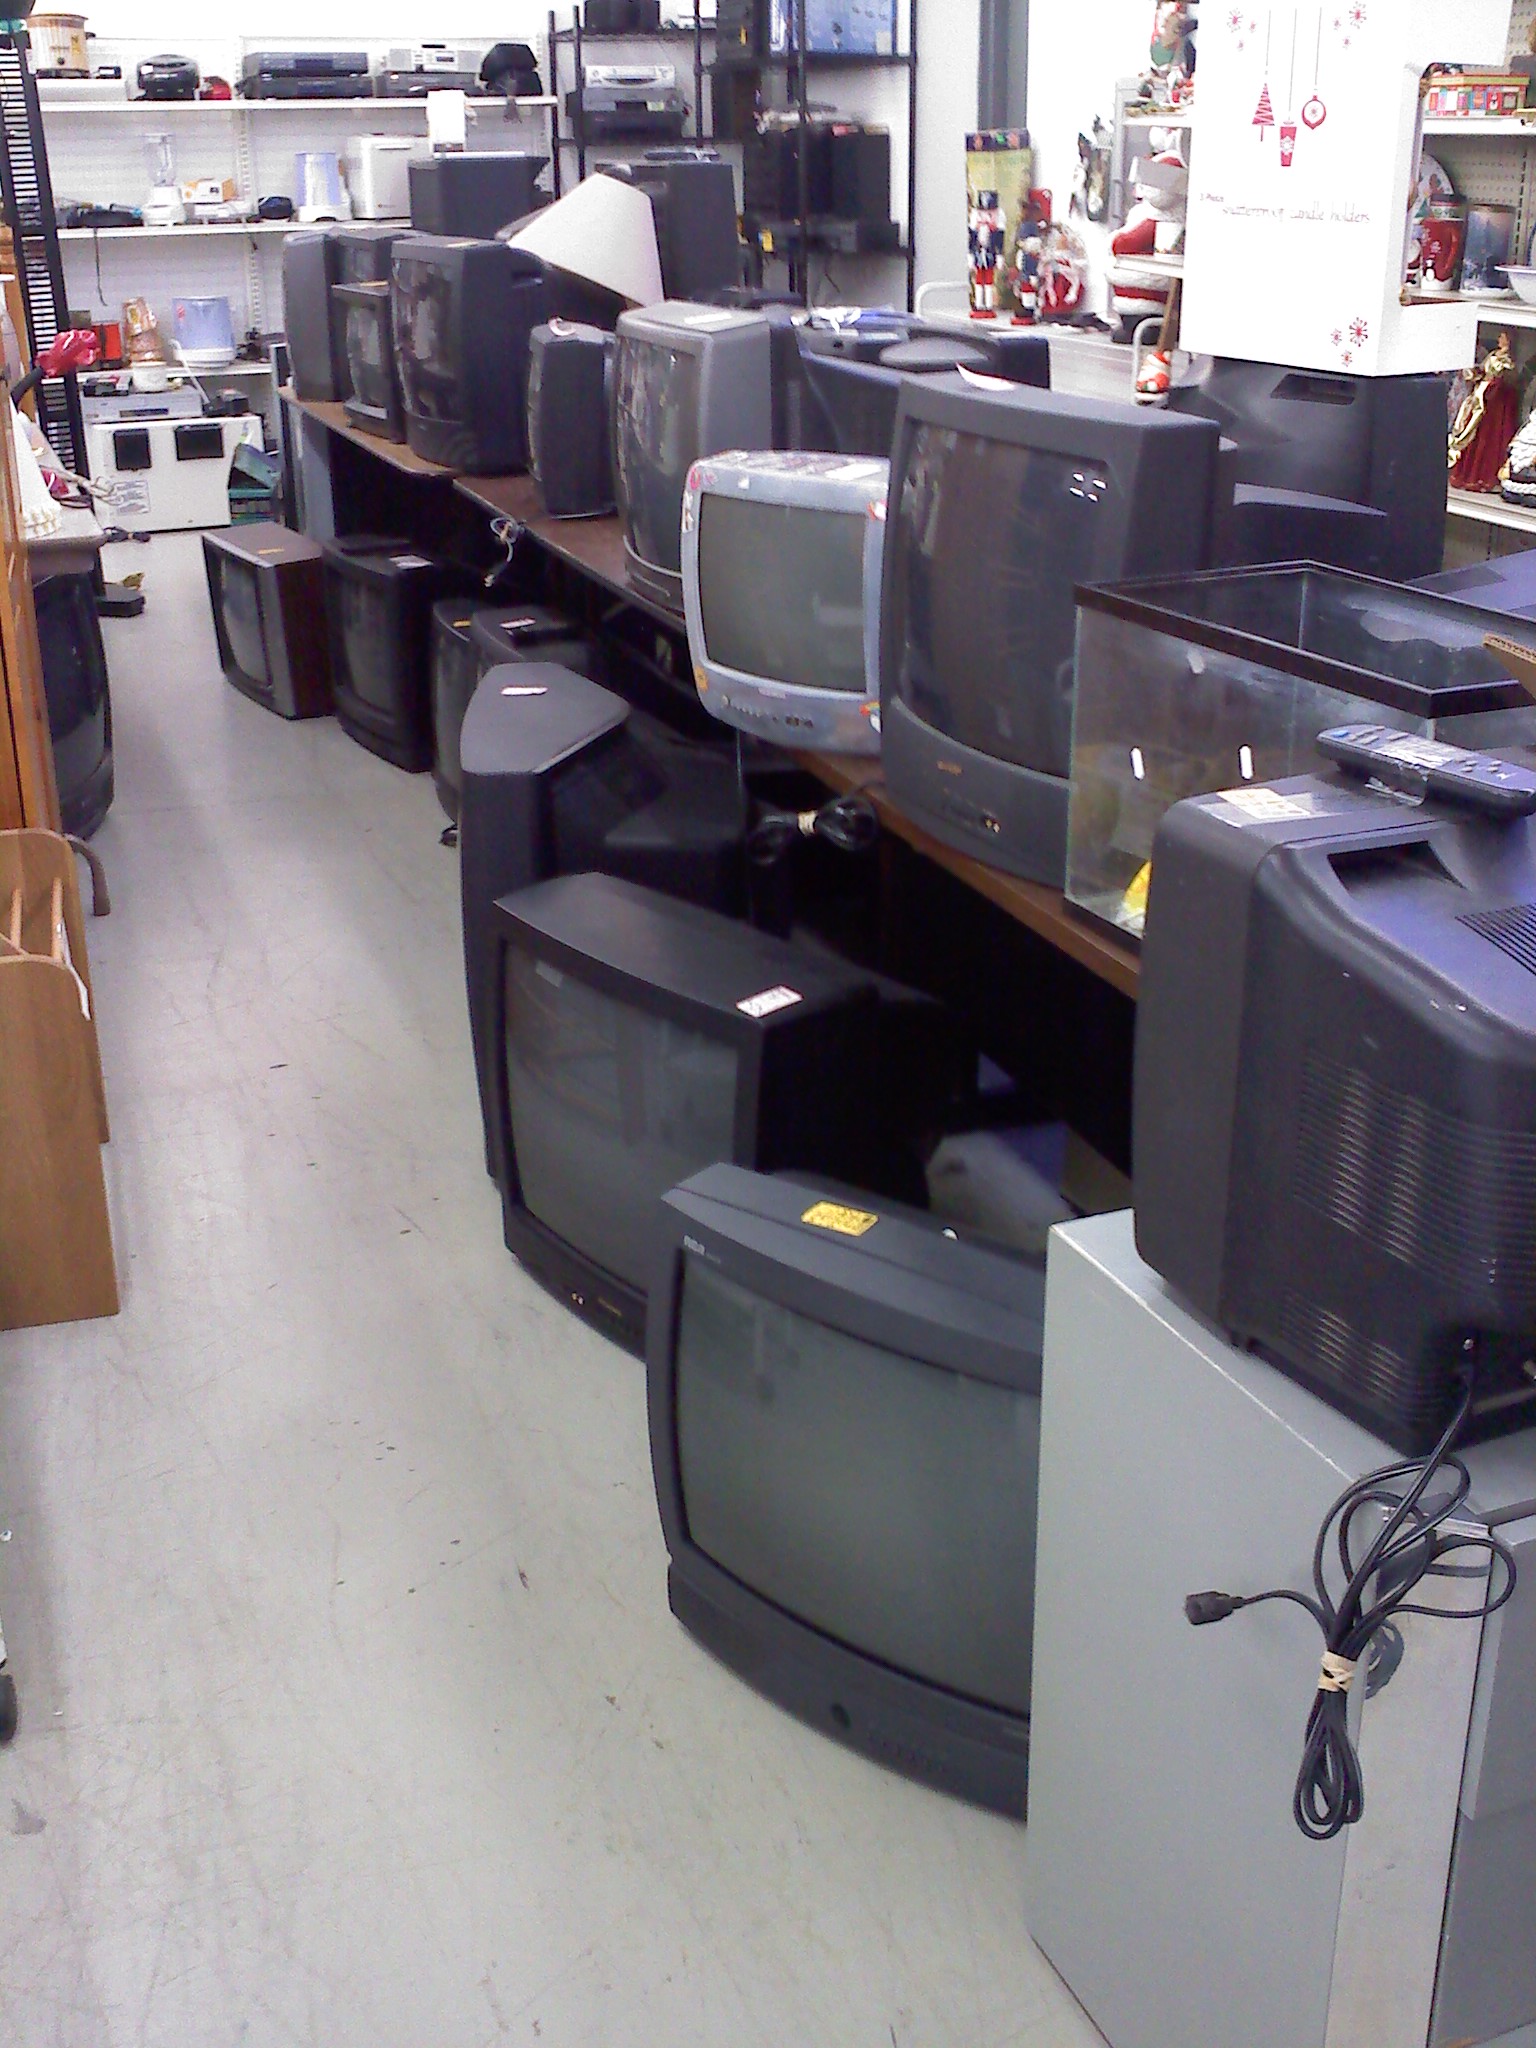 ...the graveyard for "non-flat screen" TVs